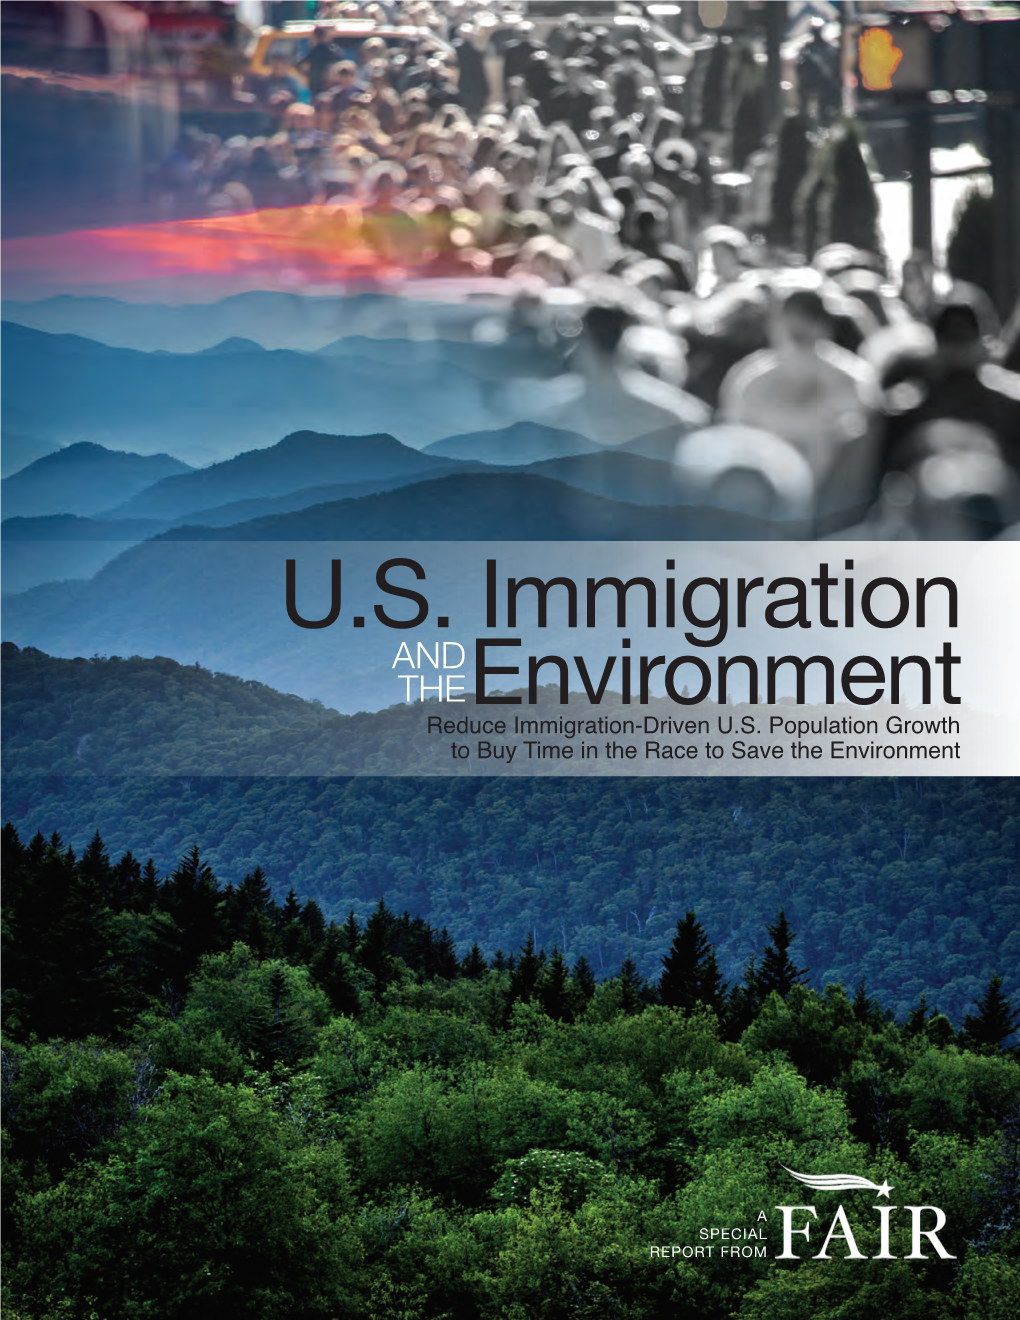 U.S. Immigration and the Environment